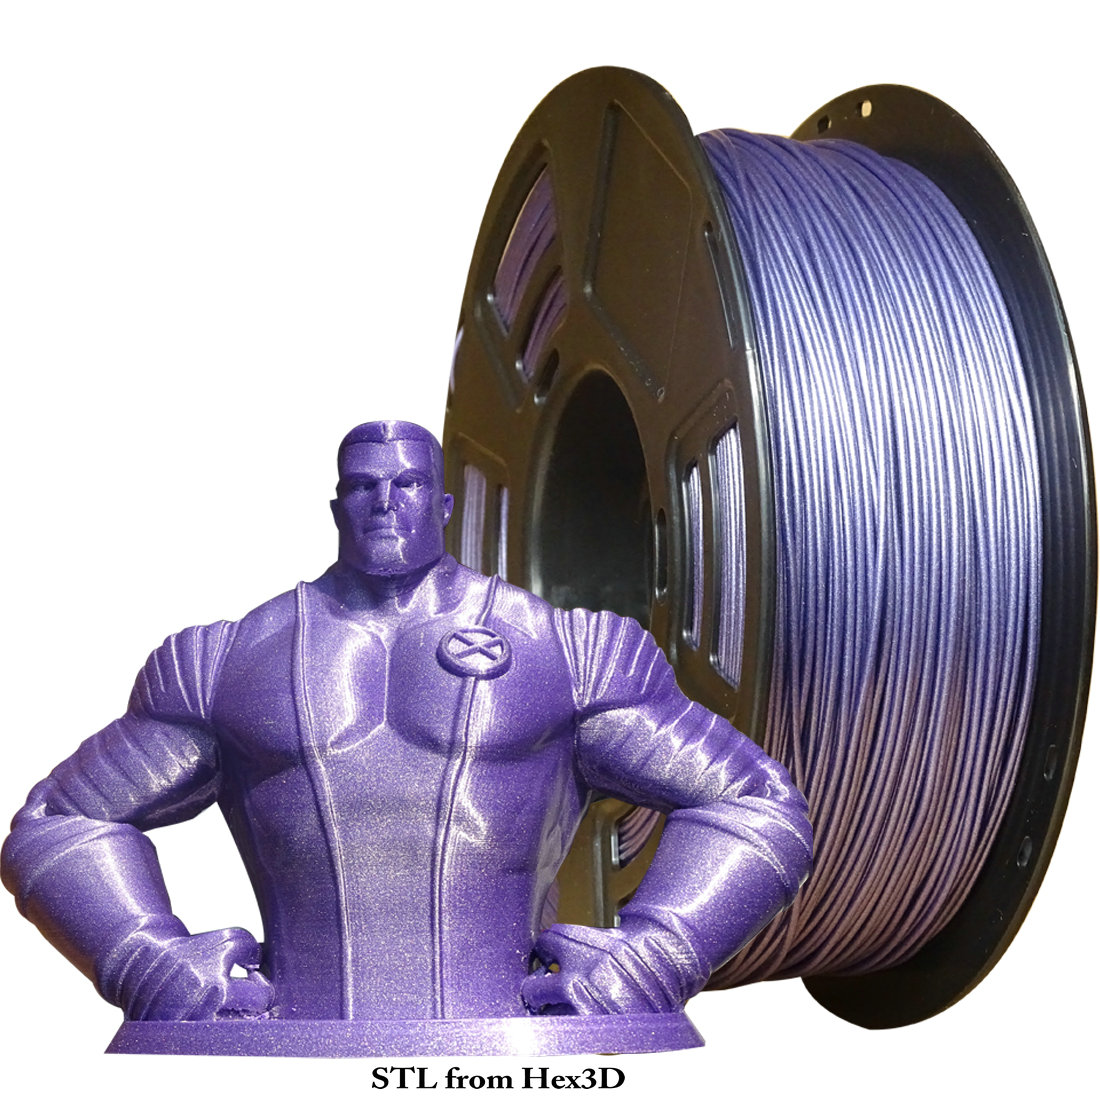 EU Available Stronghero3D PLA 3D Printer Filament 1.75mm Colours available  choose Net Weight 1kg for Anet Creality A8 Cr10 Ender3 German Warehouse